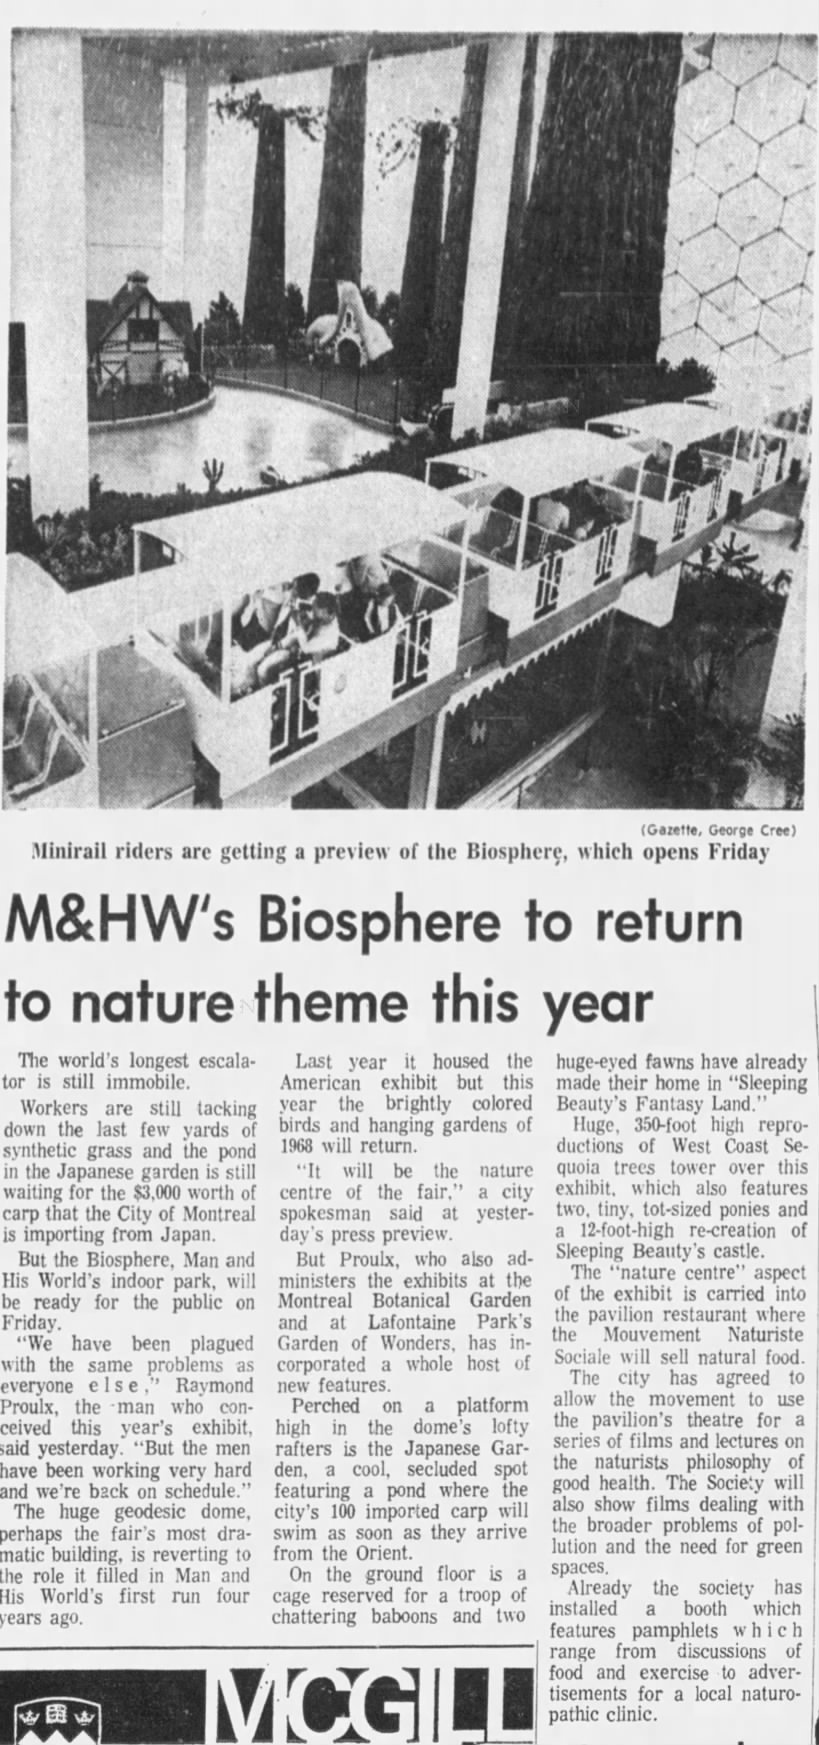 M&HW's Biosphere to return to nature theme this year